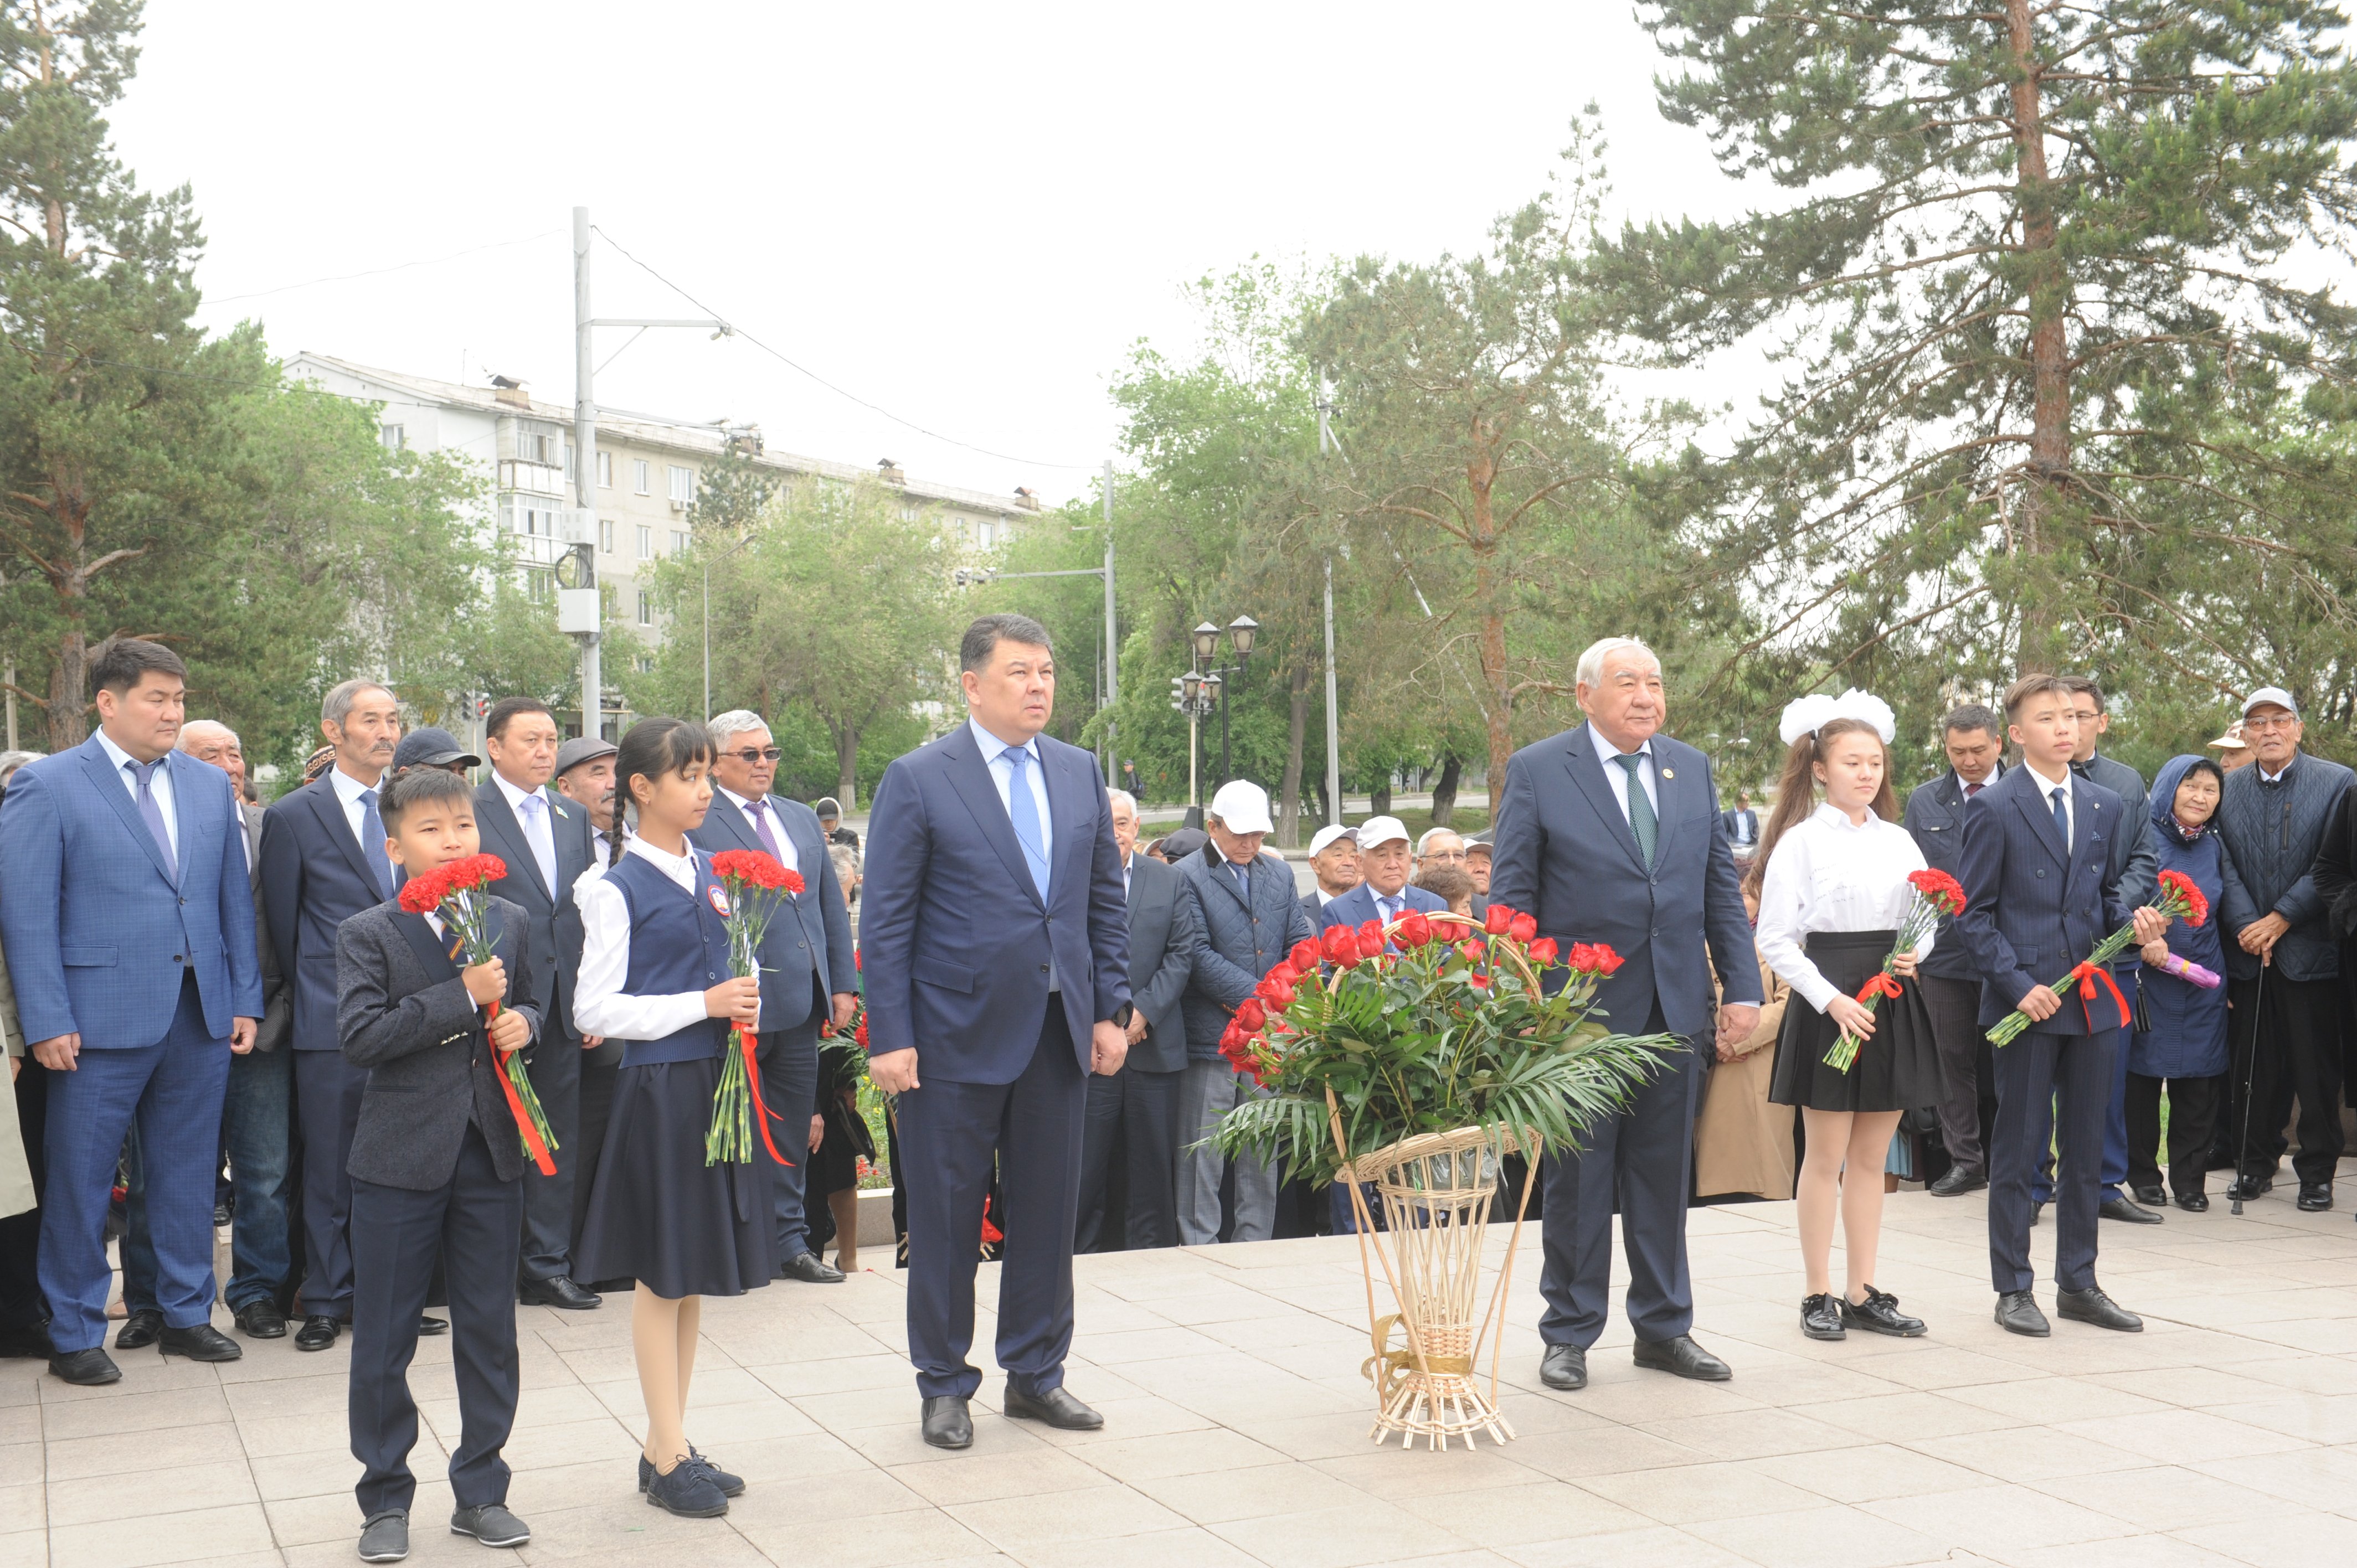 Flowers are laid at the monument of D. Konaev